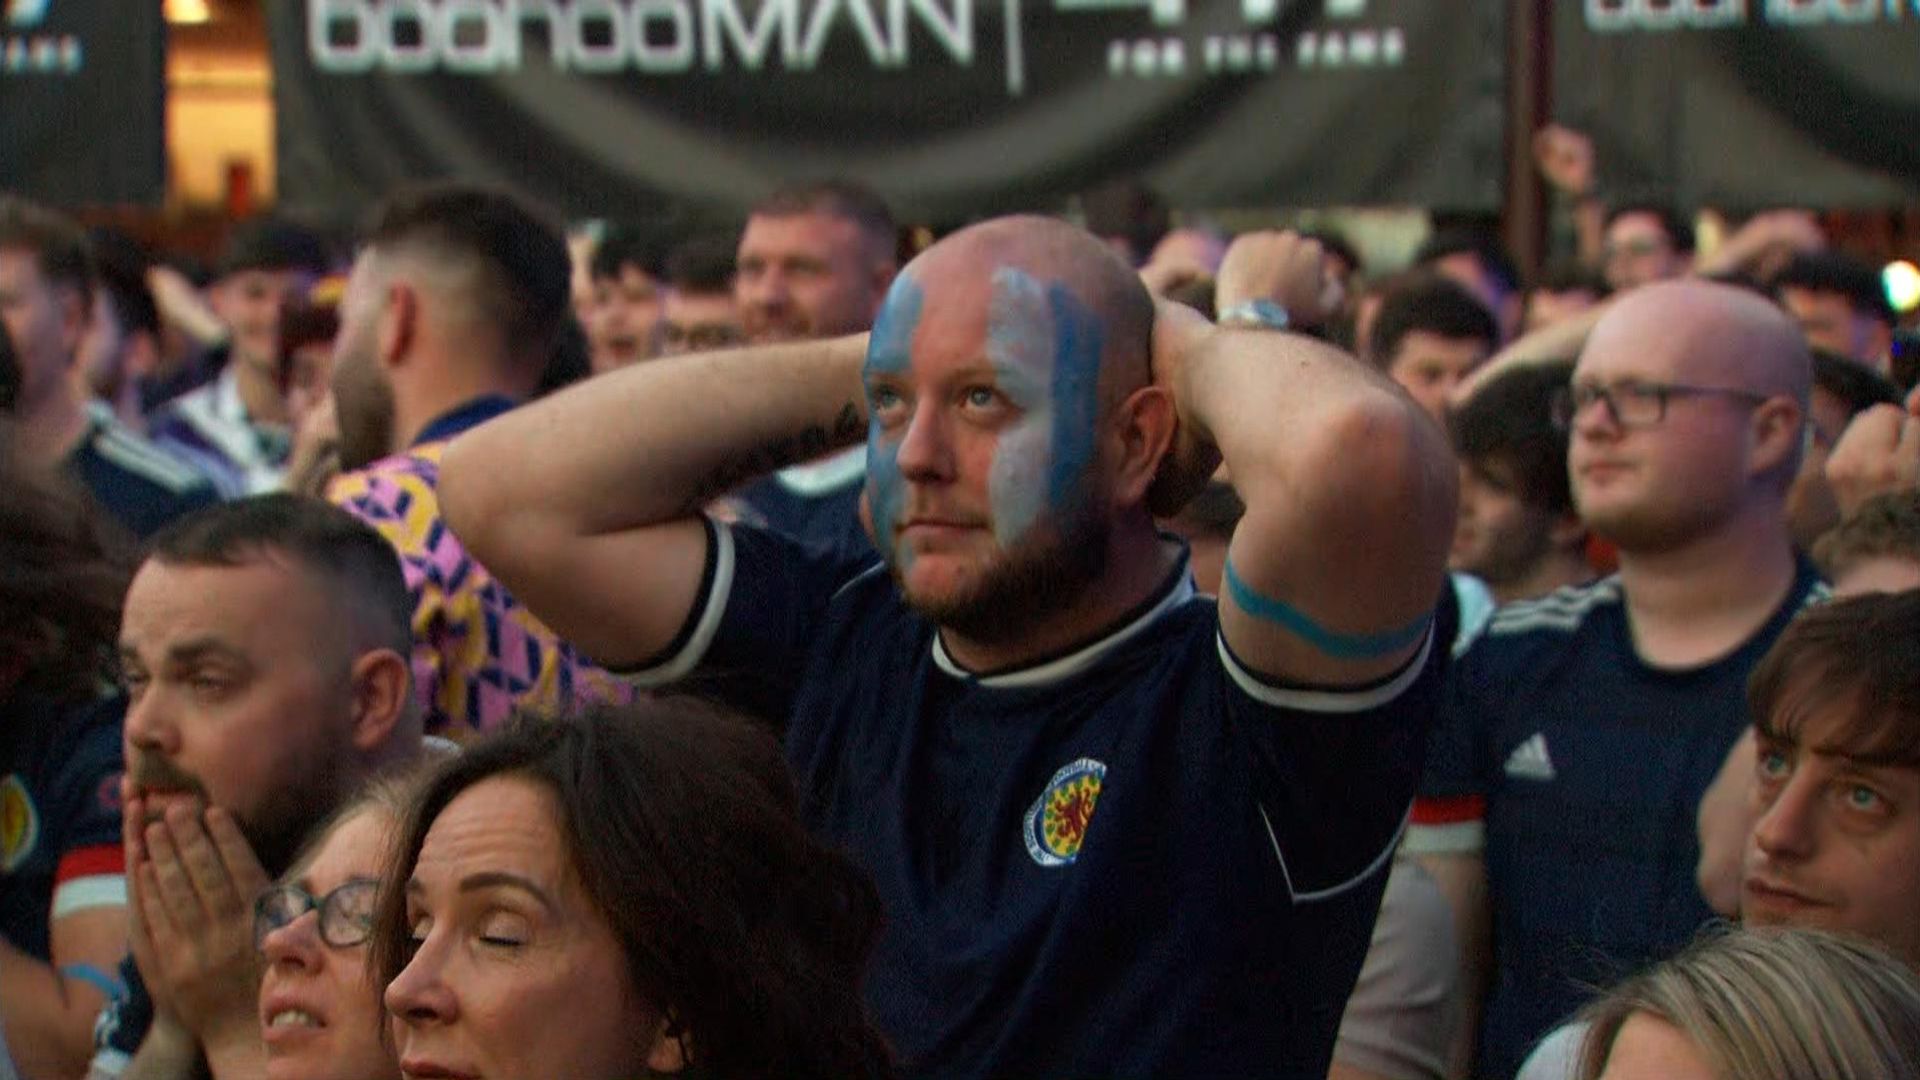 Scotland’s moment on the international stage is over – with fans blaming one person